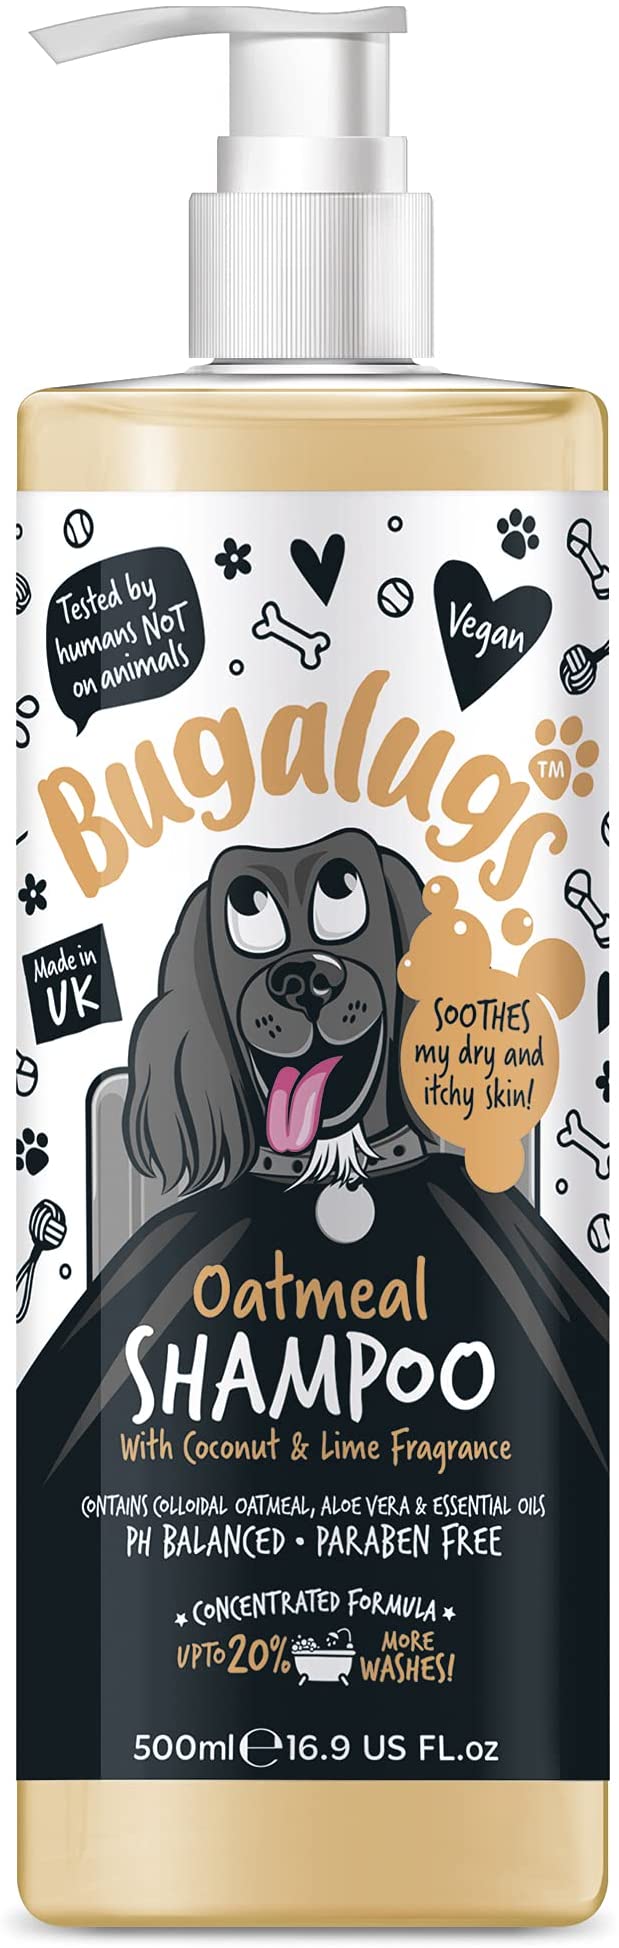 BUGALUGS Oatmeal & Aloe Vera Dog Shampoo Dog Grooming Shampoo Products for Smelly Dogs with Fragrance, Best Oatmeal Puppy Shampoo Vegan pet Shampoo & Conditioner